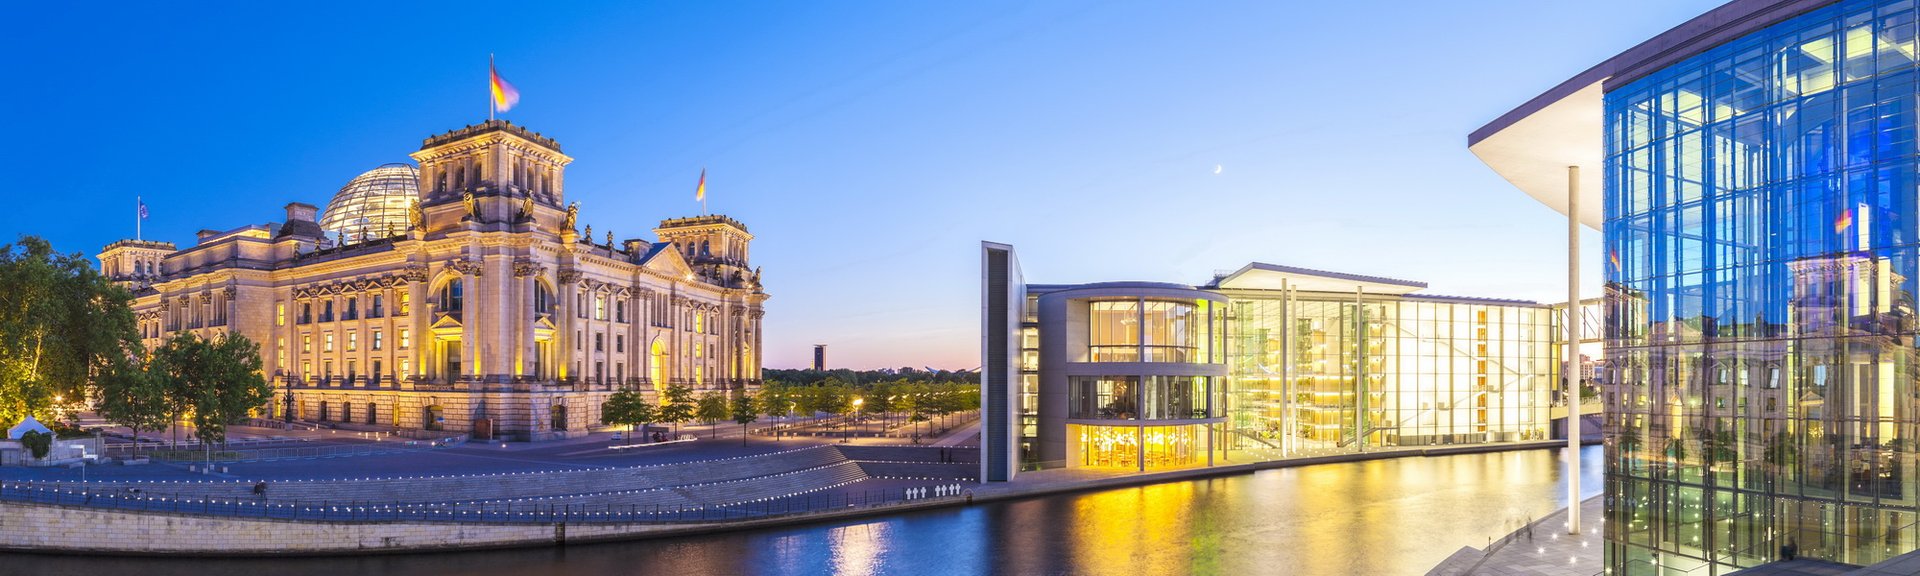 Berlin in detail – Berlin-Mitte at a glance